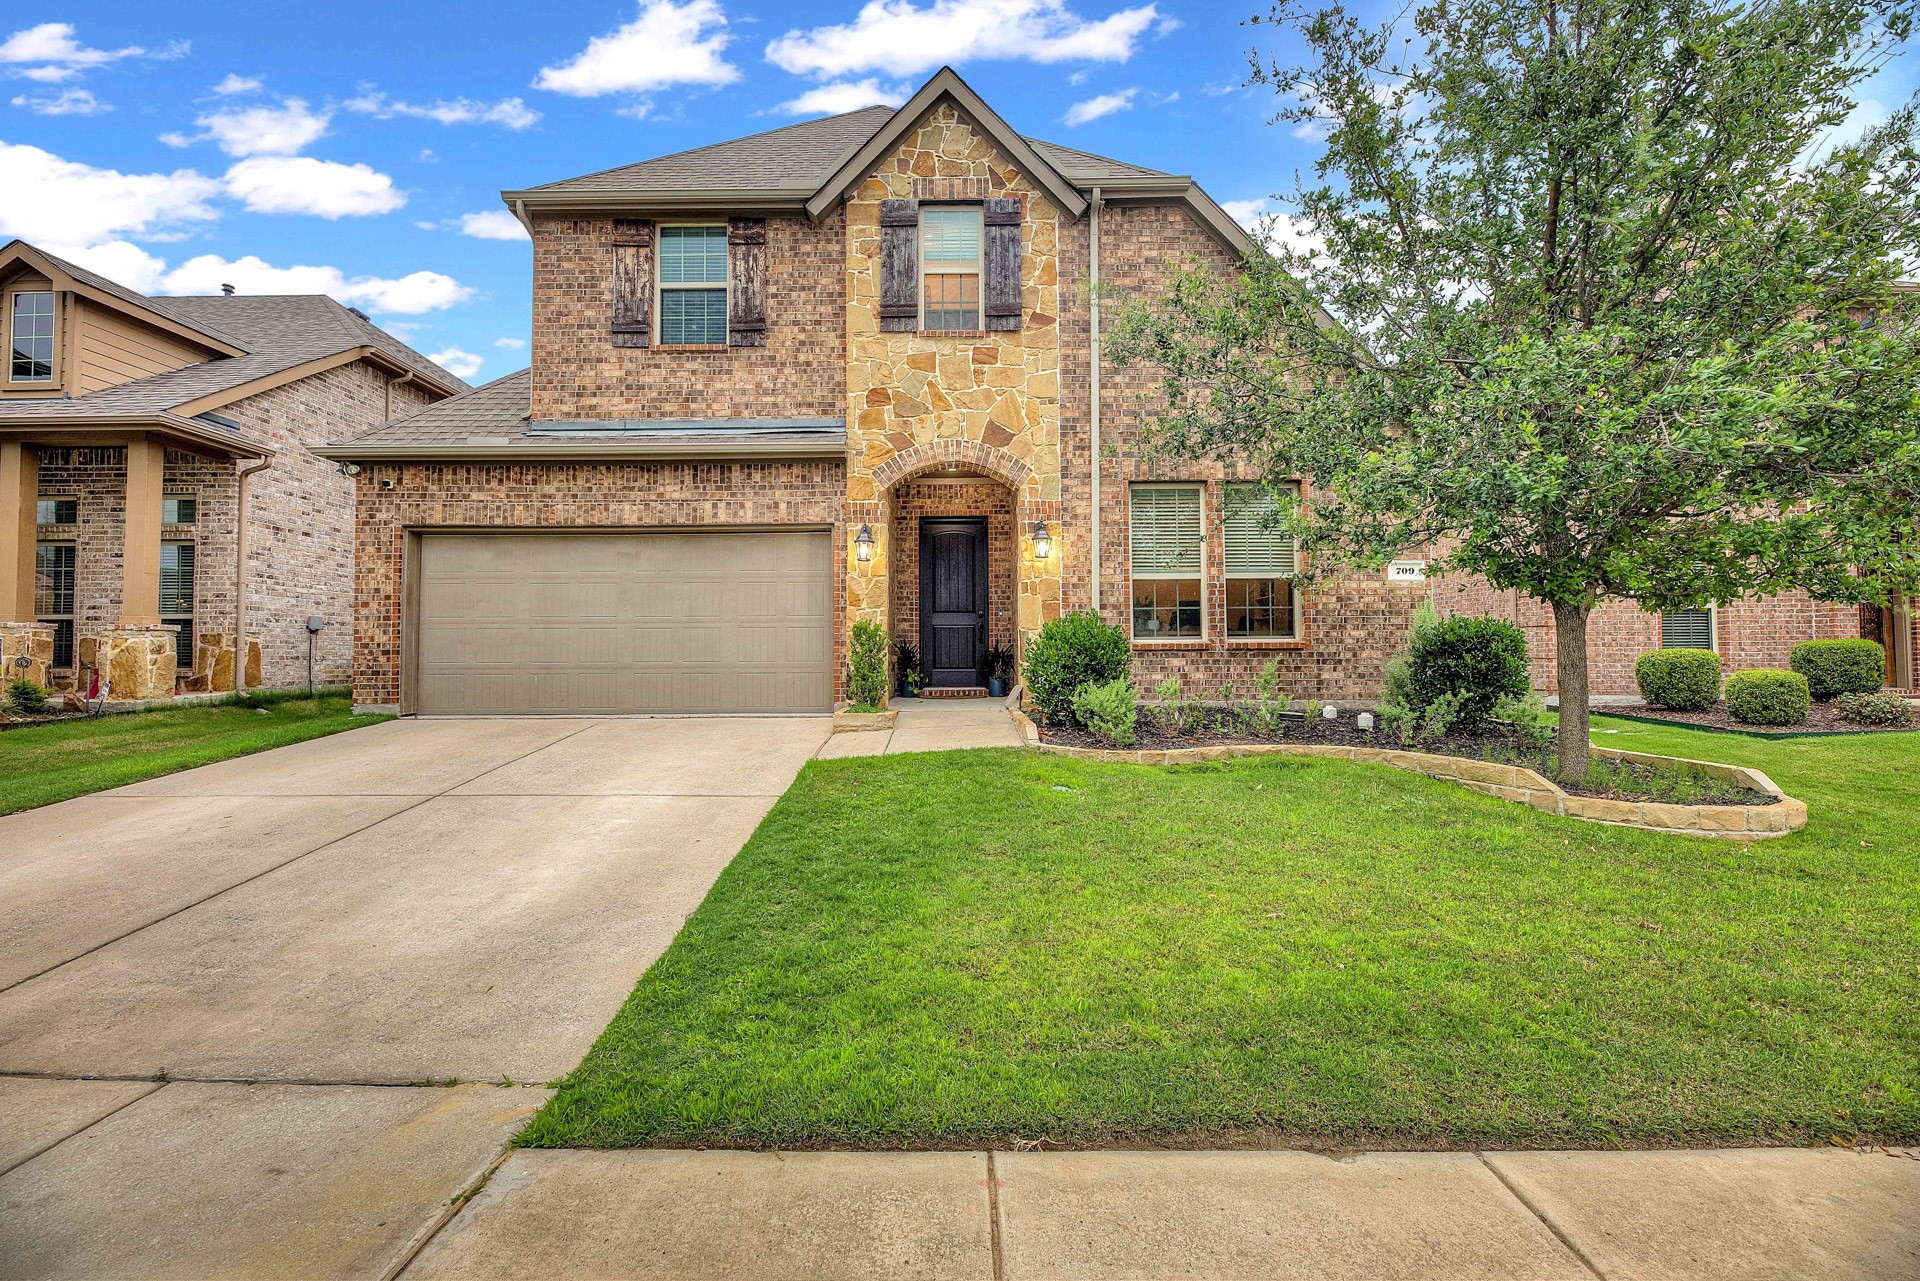 709 Wimberly Circle Frisco Home Listings - Keller Williams Real Estate